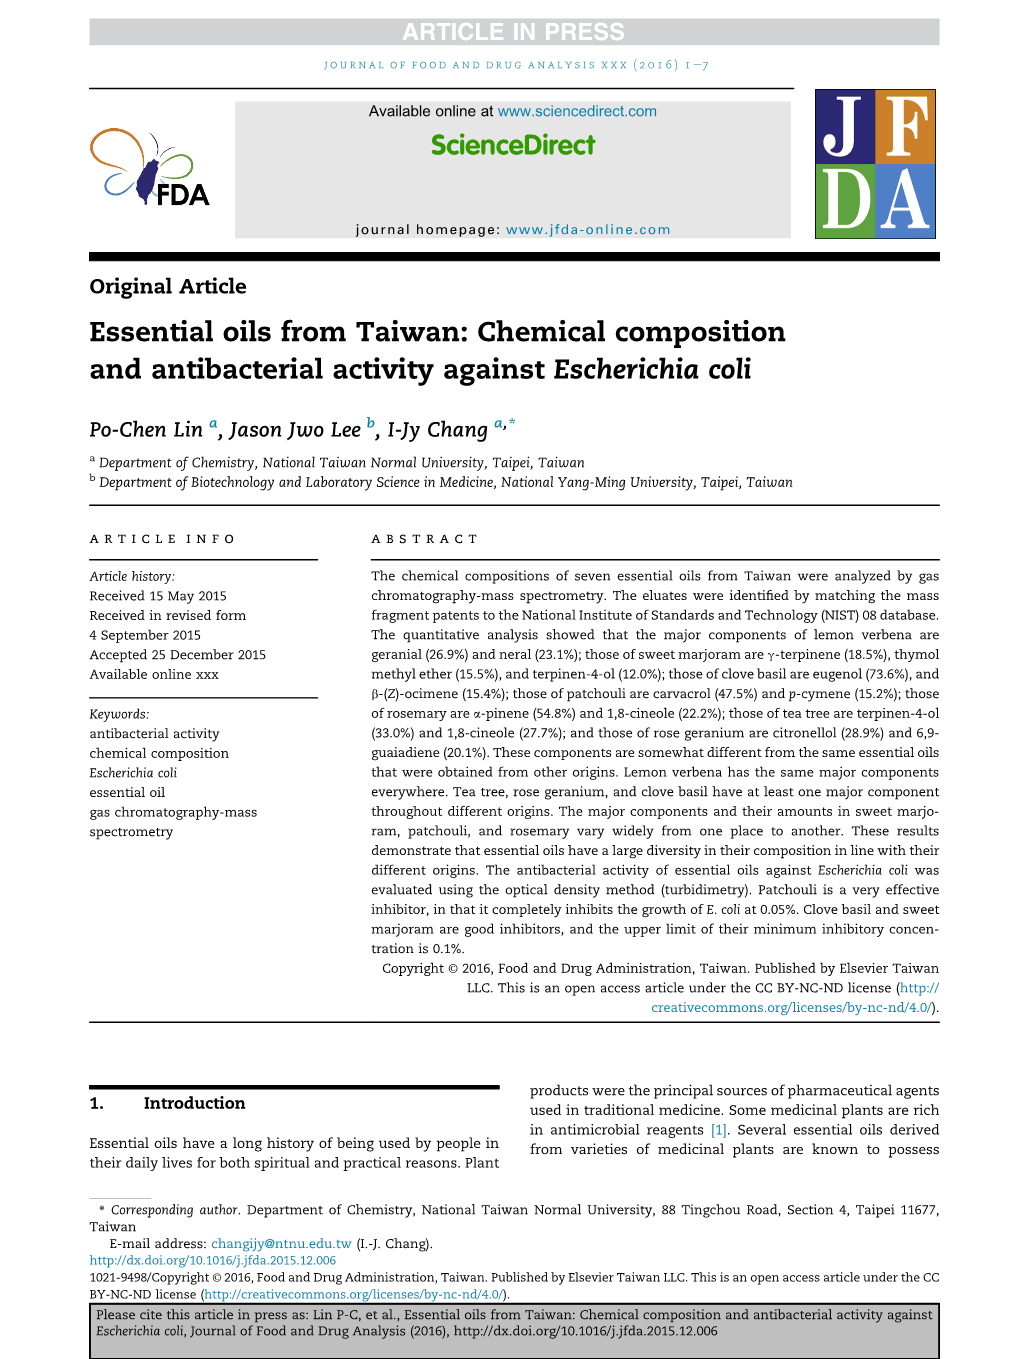 Essential Oils from Taiwan: Chemical Composition and Antibacterial Activity Against Escherichia Coli